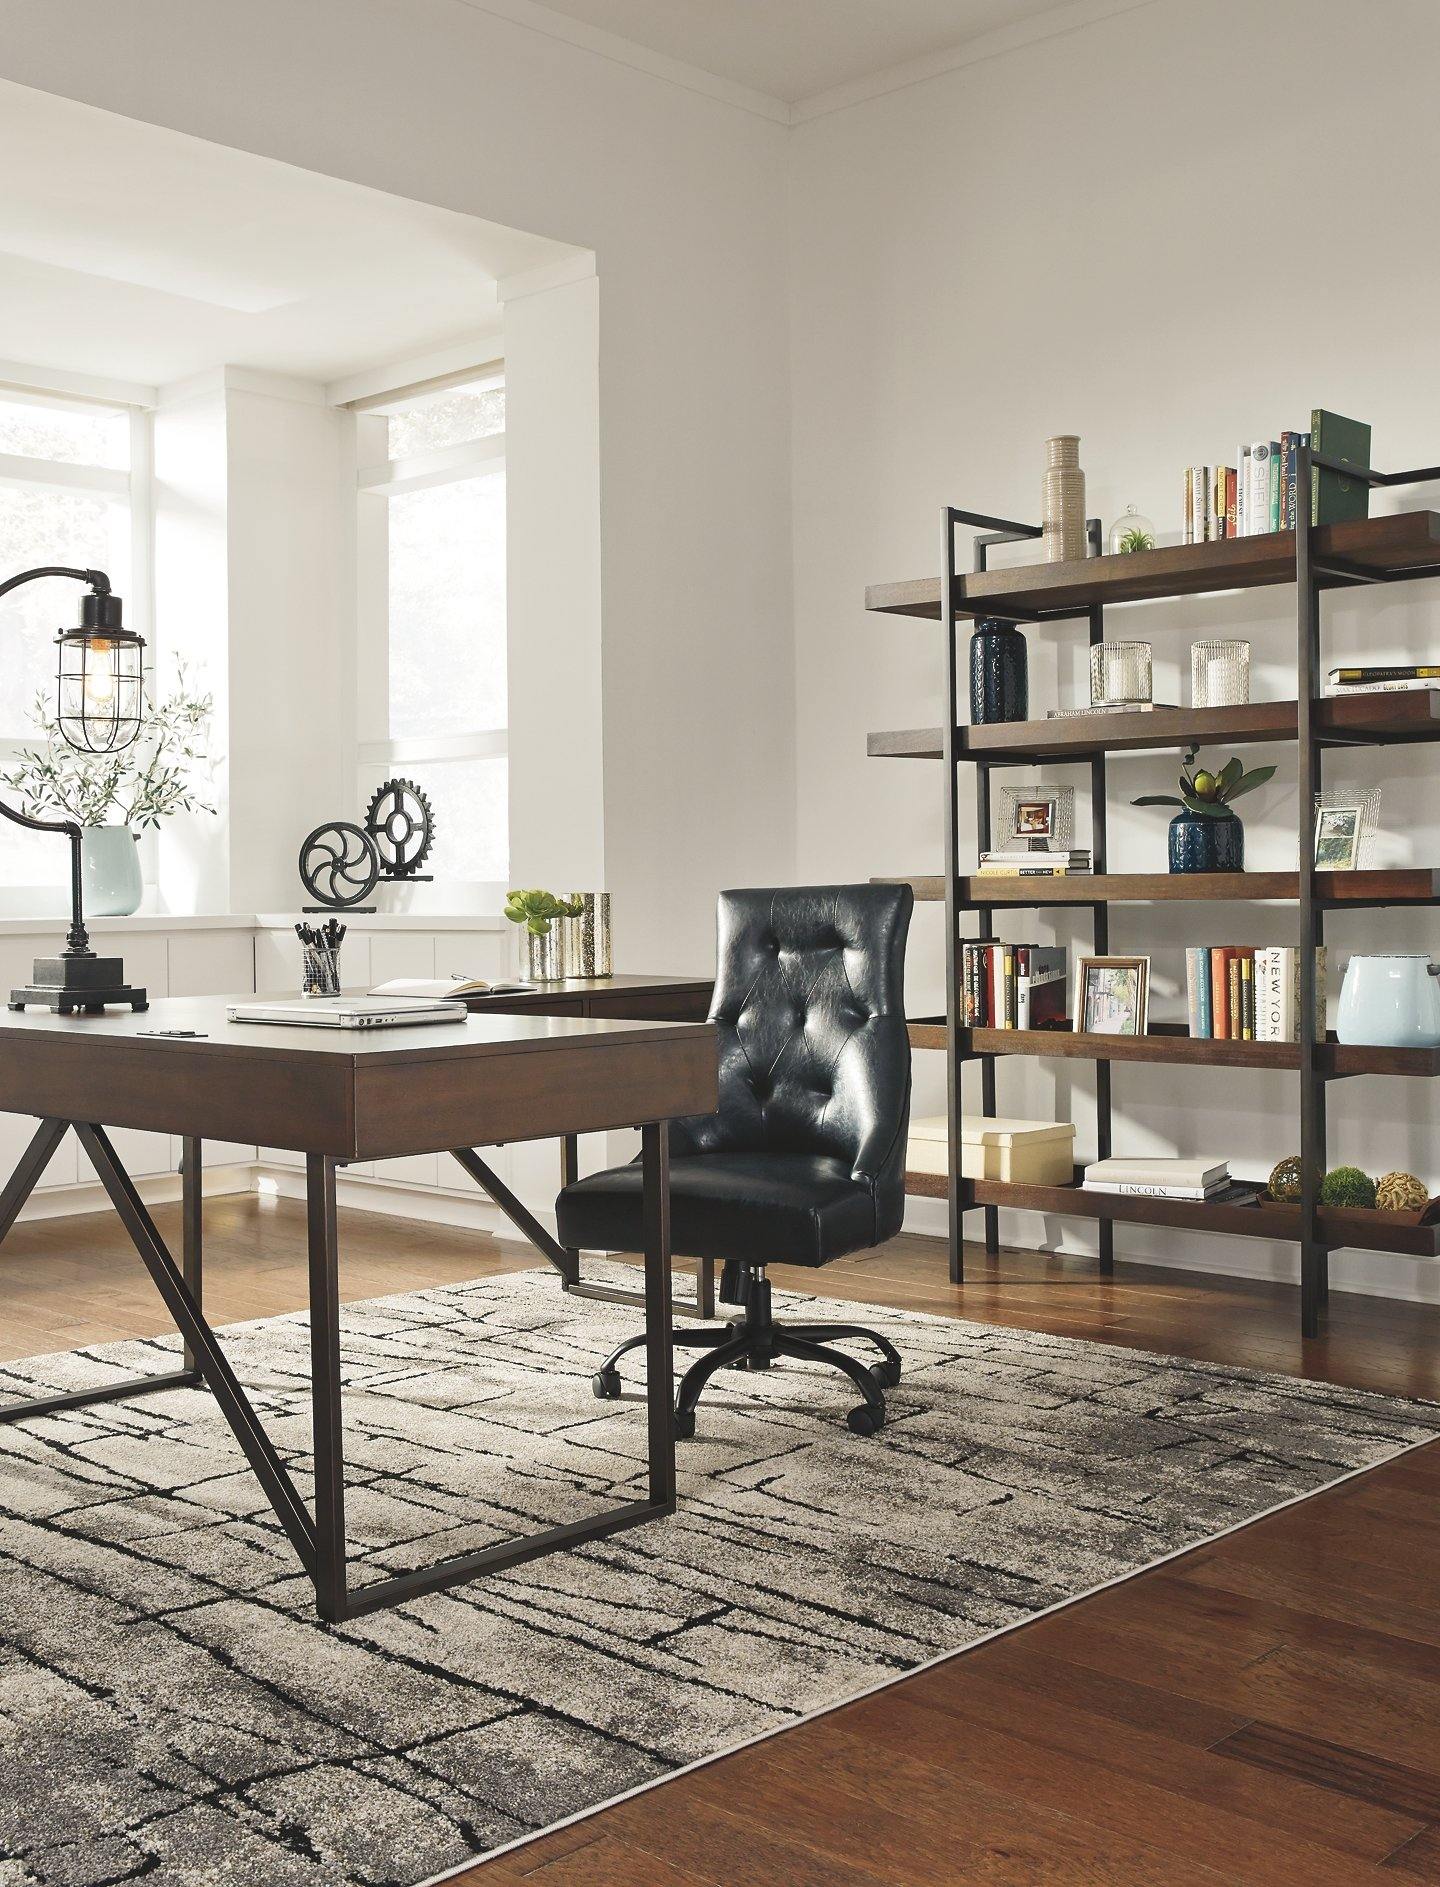 Brown Contemporary Starmore 2Piece Home Office Desk H633H2 By ashley - sofafair.com